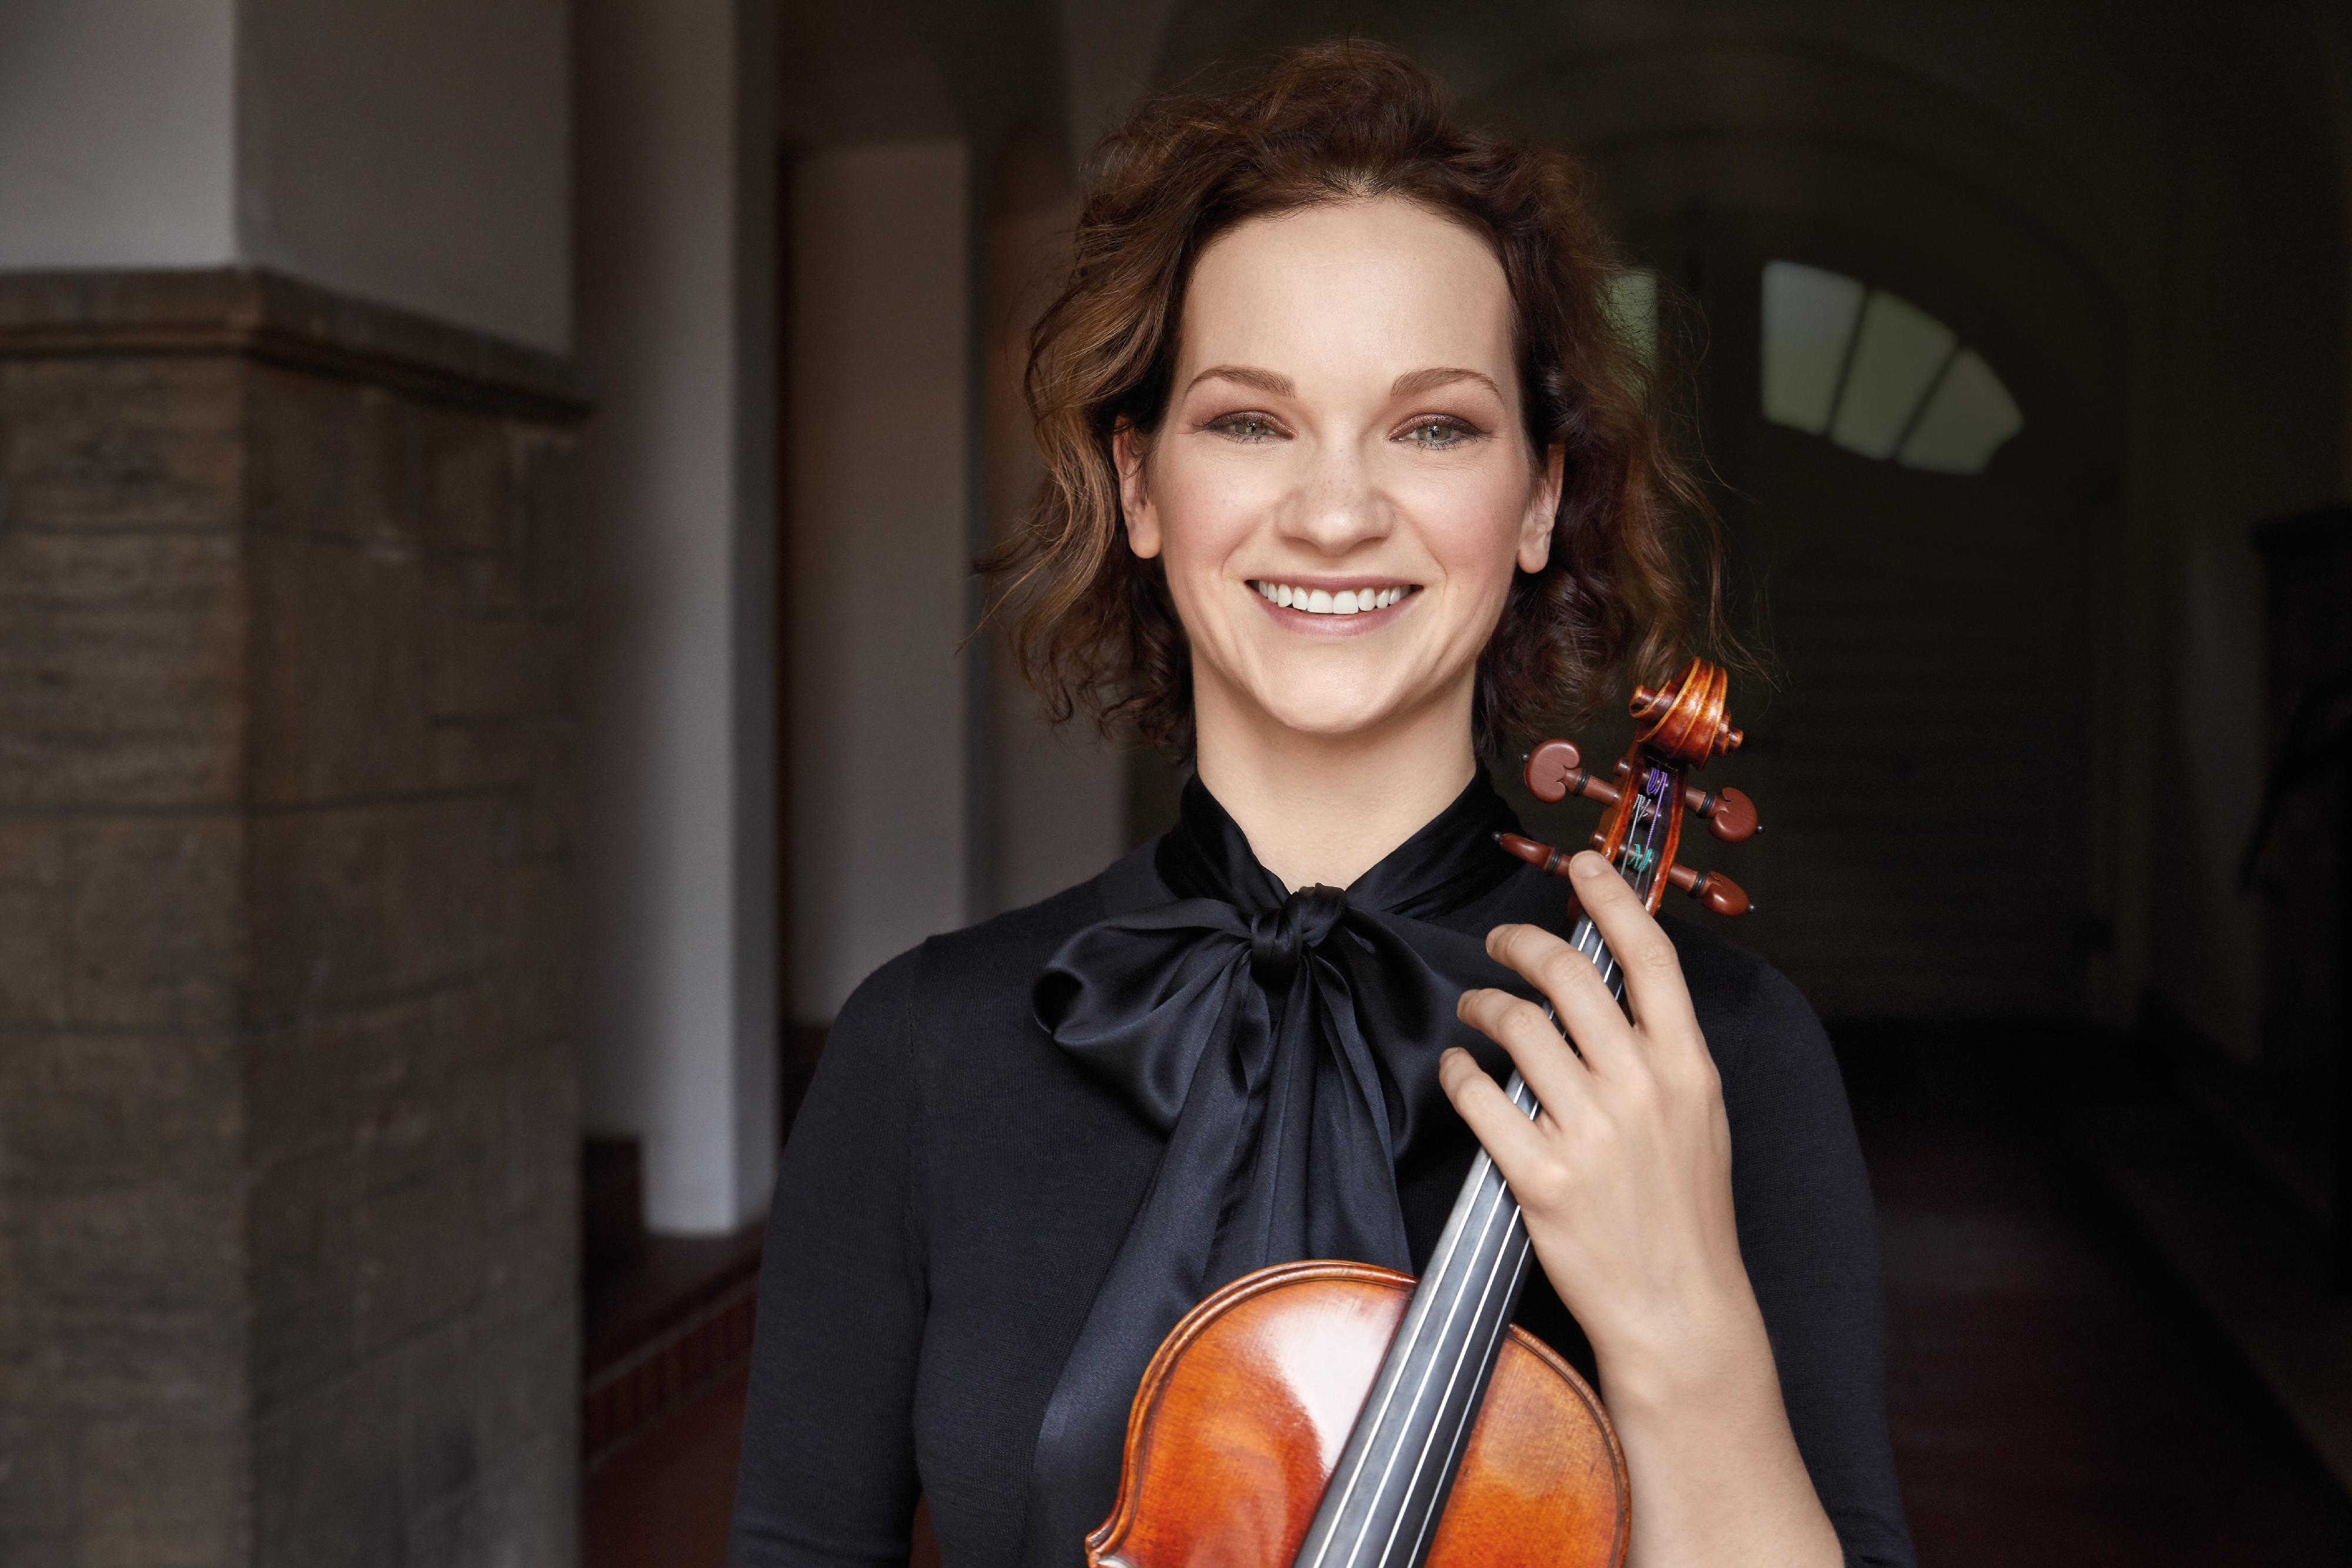 The New York Philharmonic has been invited by the Leisure and Cultural Services Department to stage two concerts on July 4 and 5 (Tuesday and Wednesday). Photo shows violinist Hilary Hahn. (Source of photo: Dana van Leeuwen/Decca)